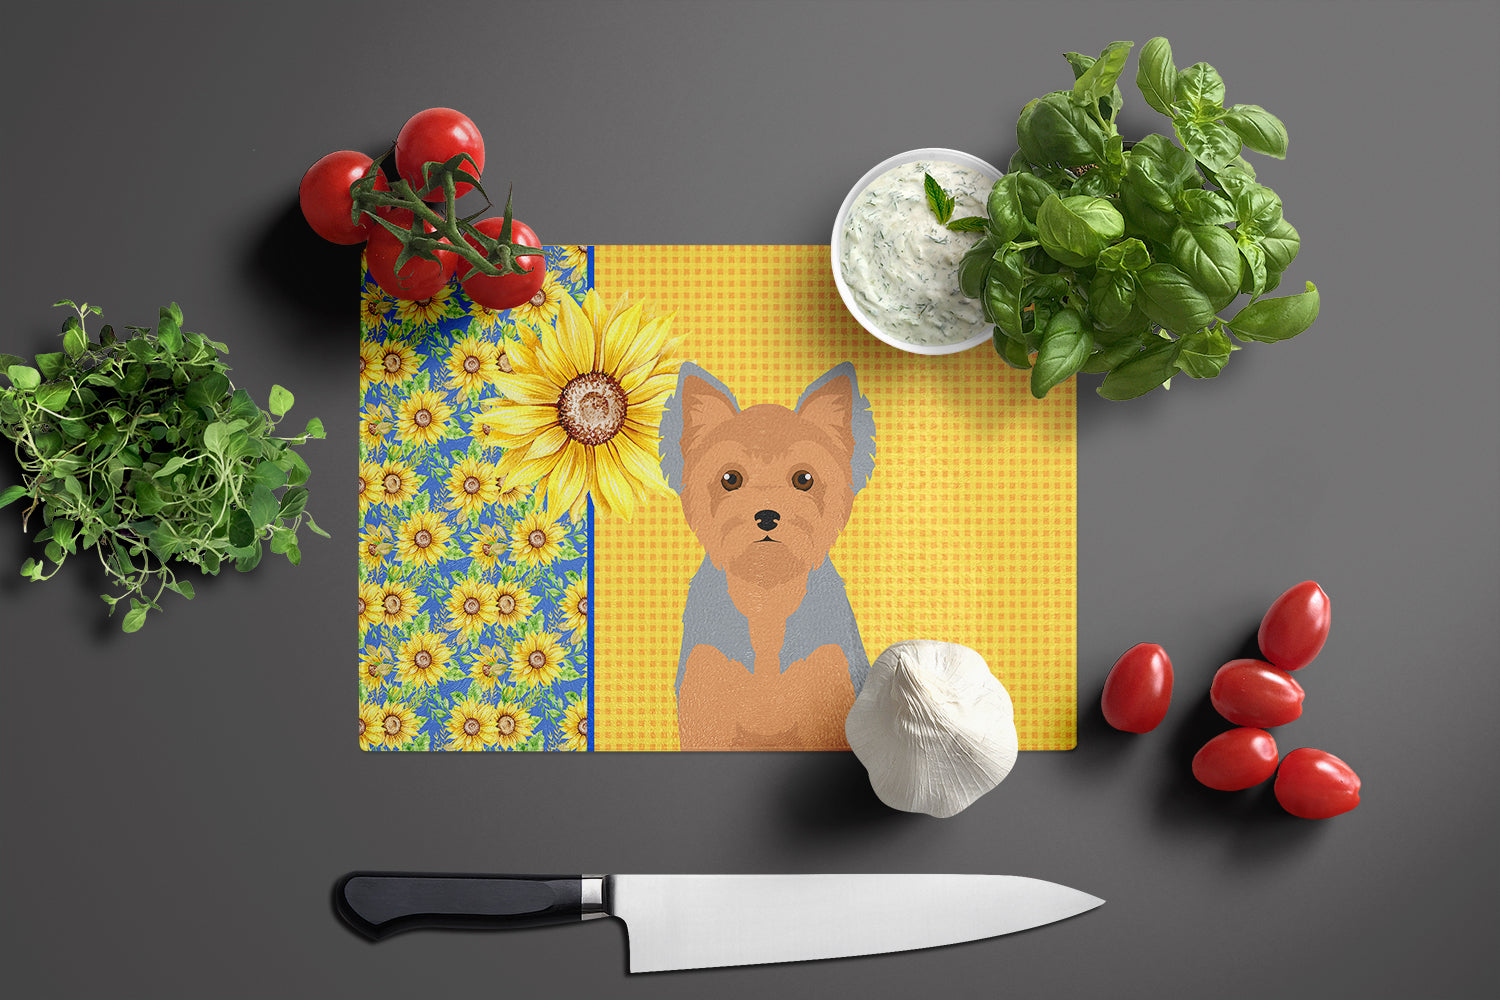 Summer Sunflowers Blue and Tan Puppy Cut Yorkshire Terrier Glass Cutting Board Large - the-store.com